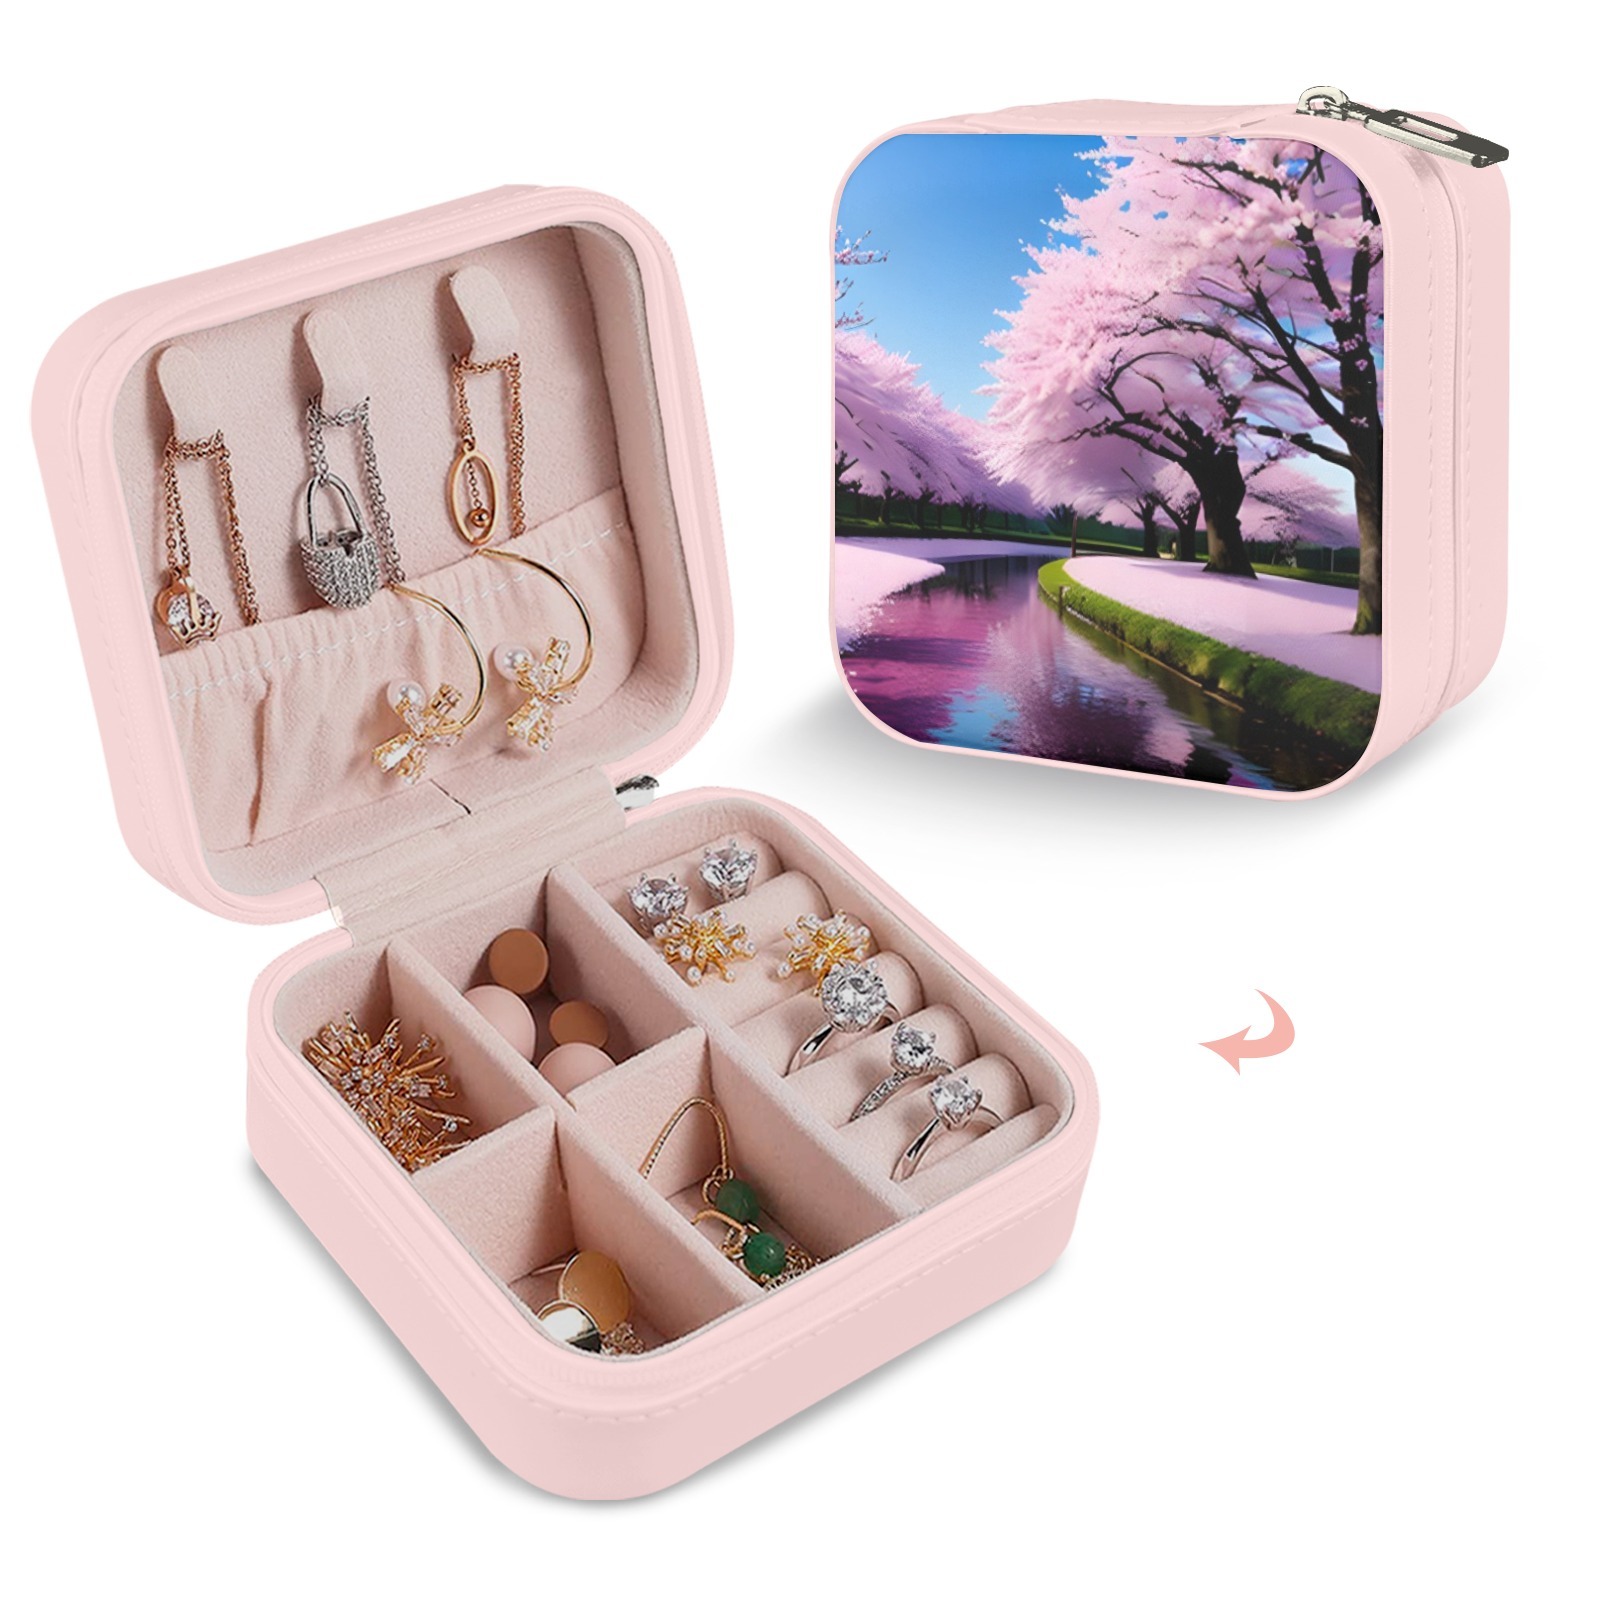 Primary image for Leather Travel Jewelry Storage Box - Portable Jewelry Organizer - Pink River